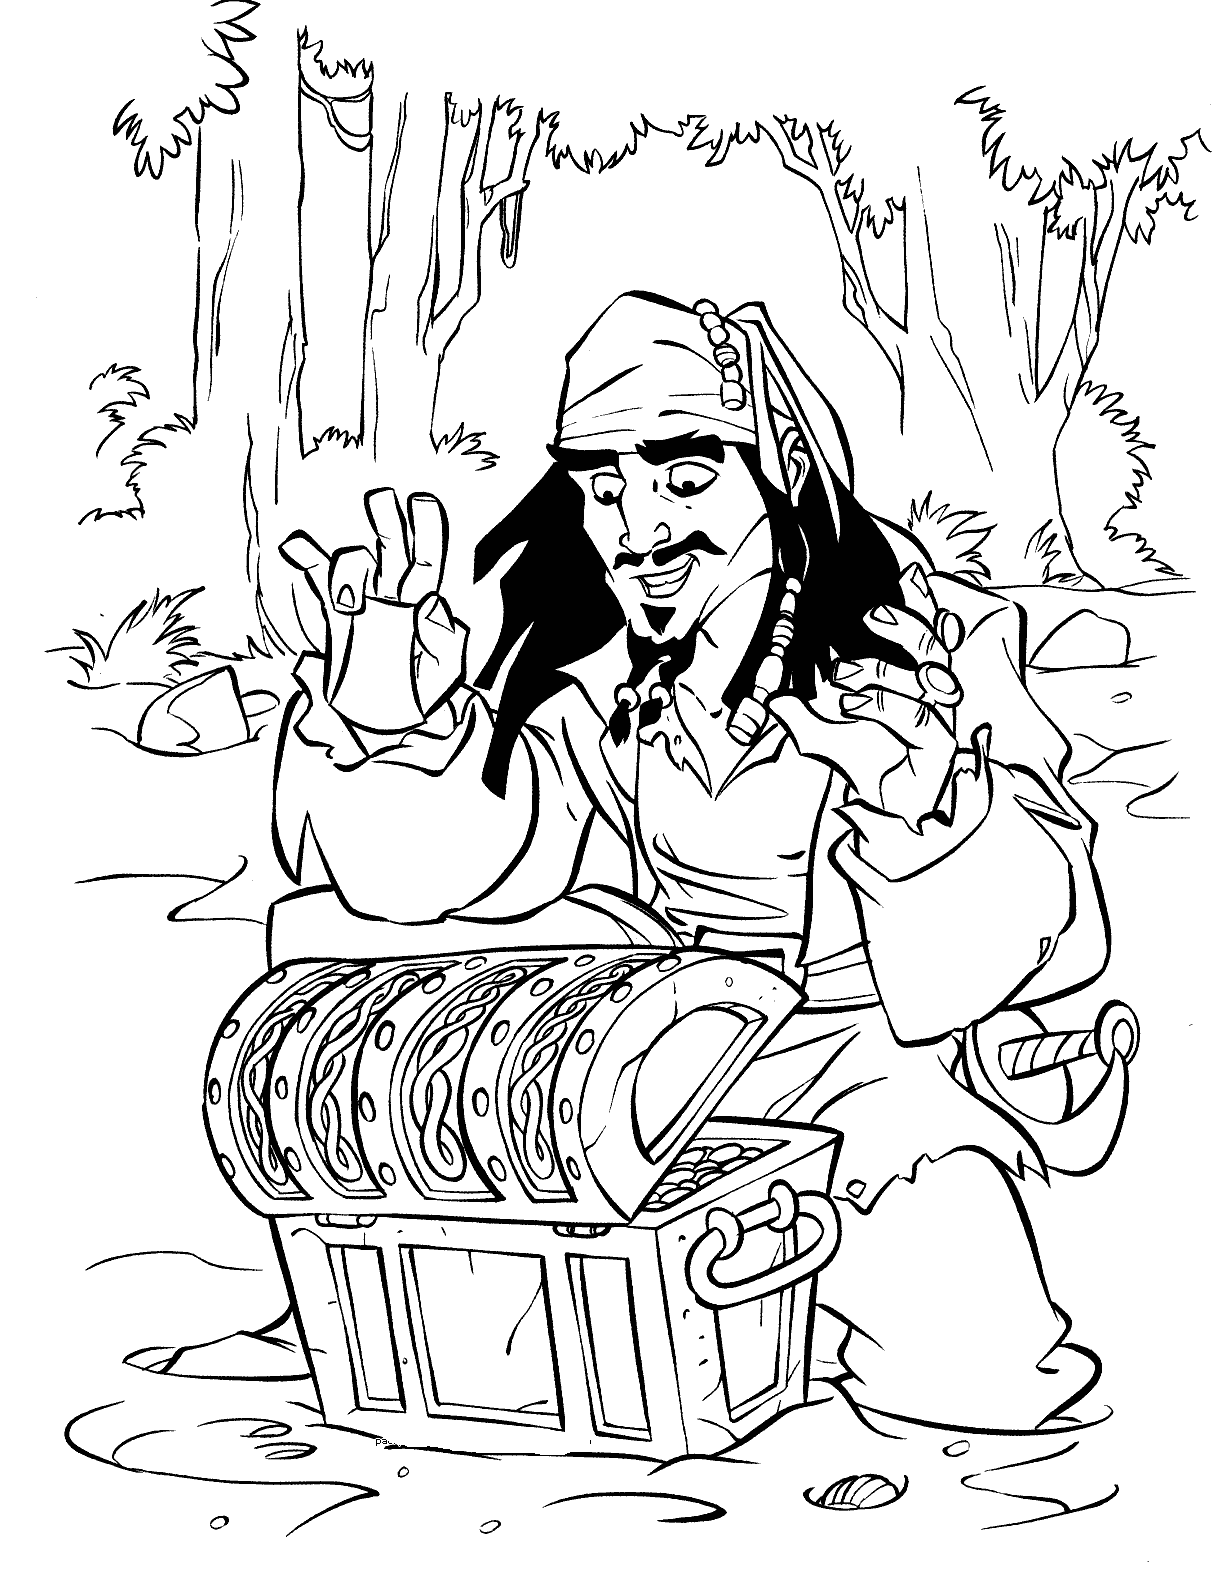 pirate-coloring-page-for-adults